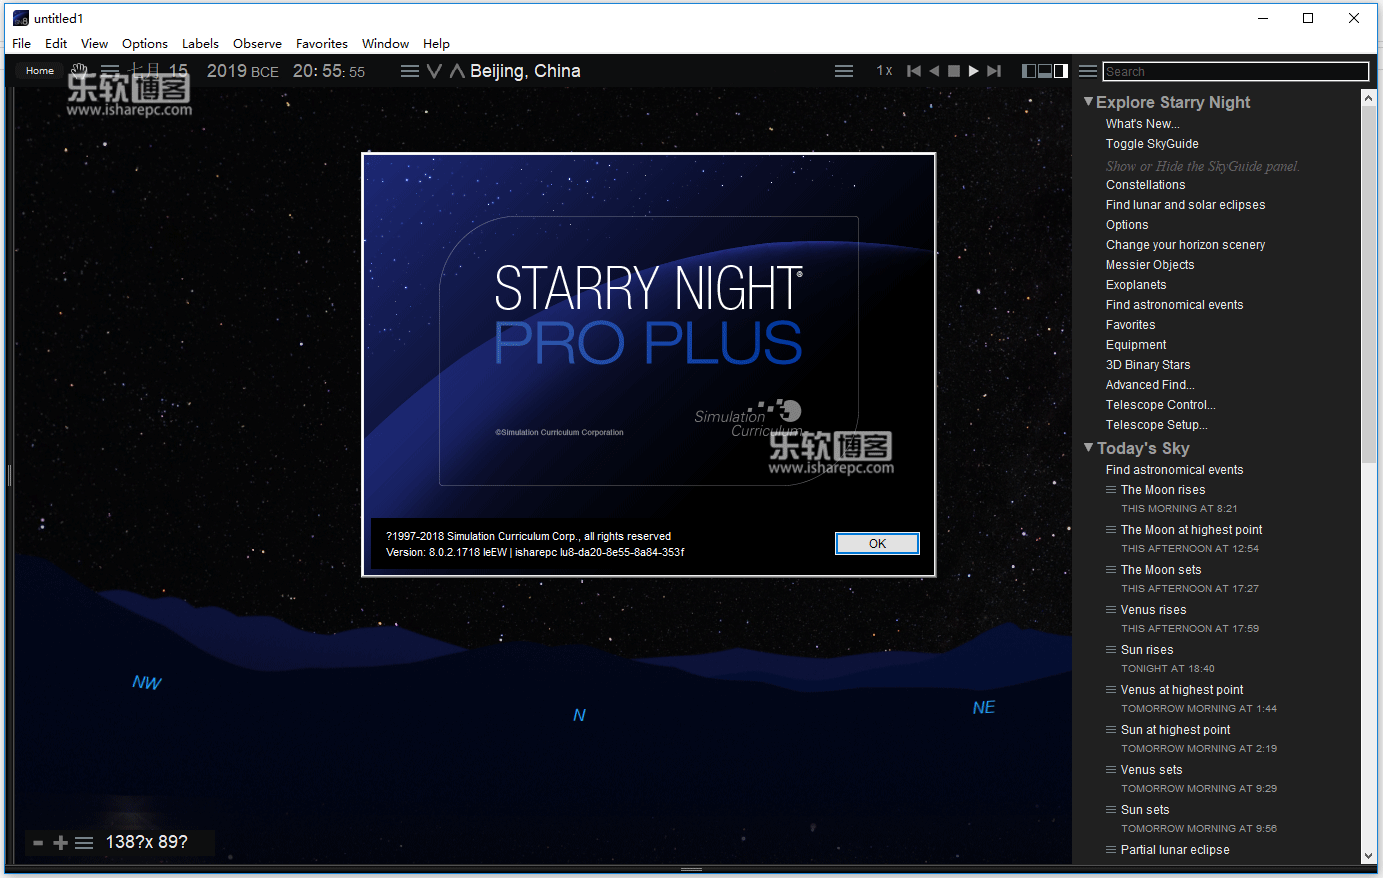 starry night pro 5 insert disc 2 will not let browser